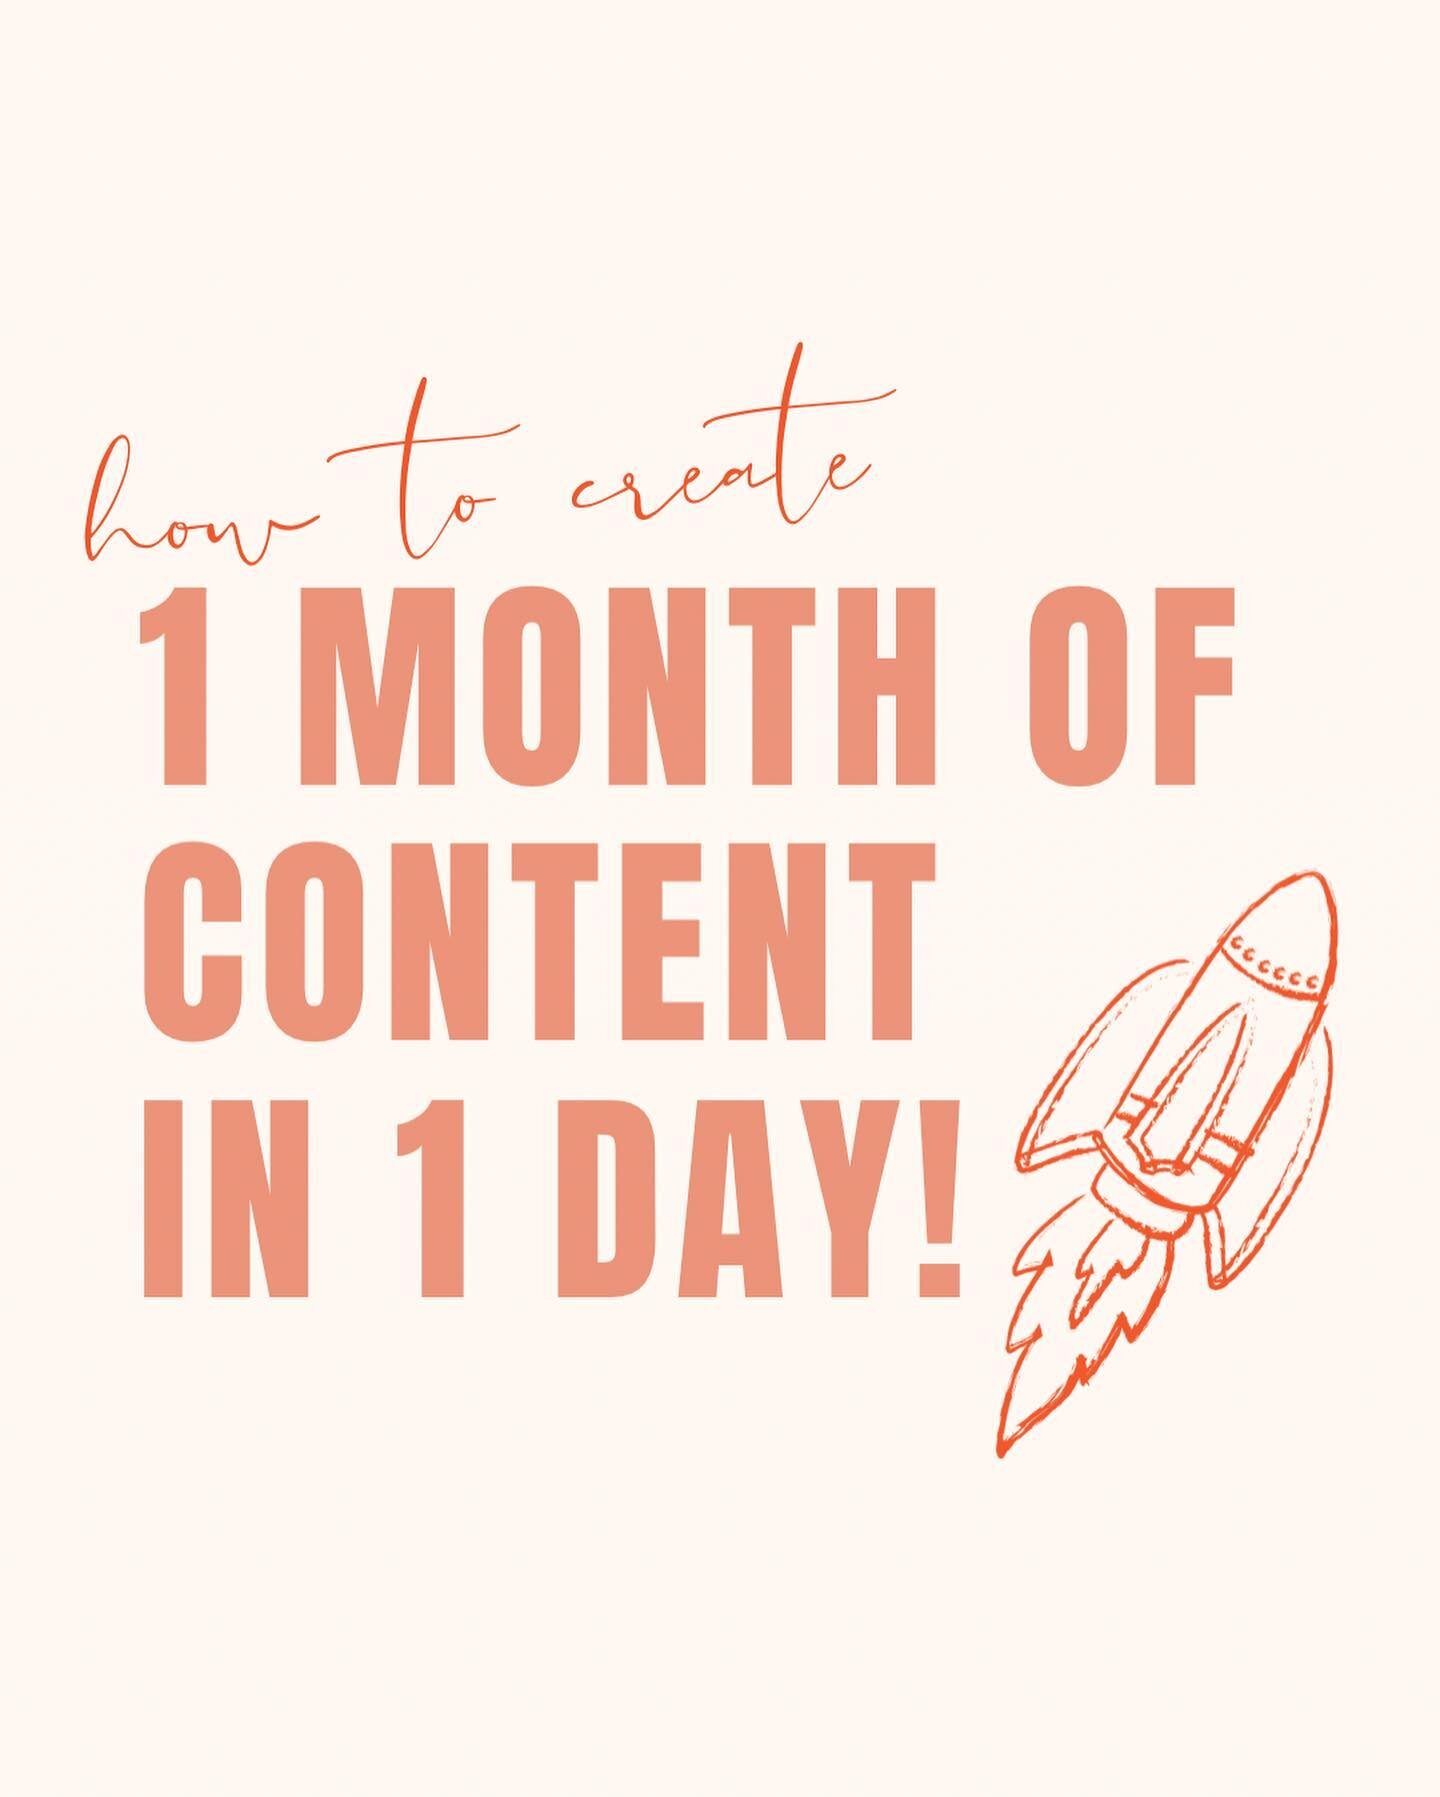 Plan all of your content for May in one day!!! Swipe for tips!

#instagramgrowth #instagramtips #instagramtricks #instagramstrategy #instagrambusiness #instagramforbusiness #instagramhacks #instagramtiosforbusiness #instagramtipsandtricks #instagramf